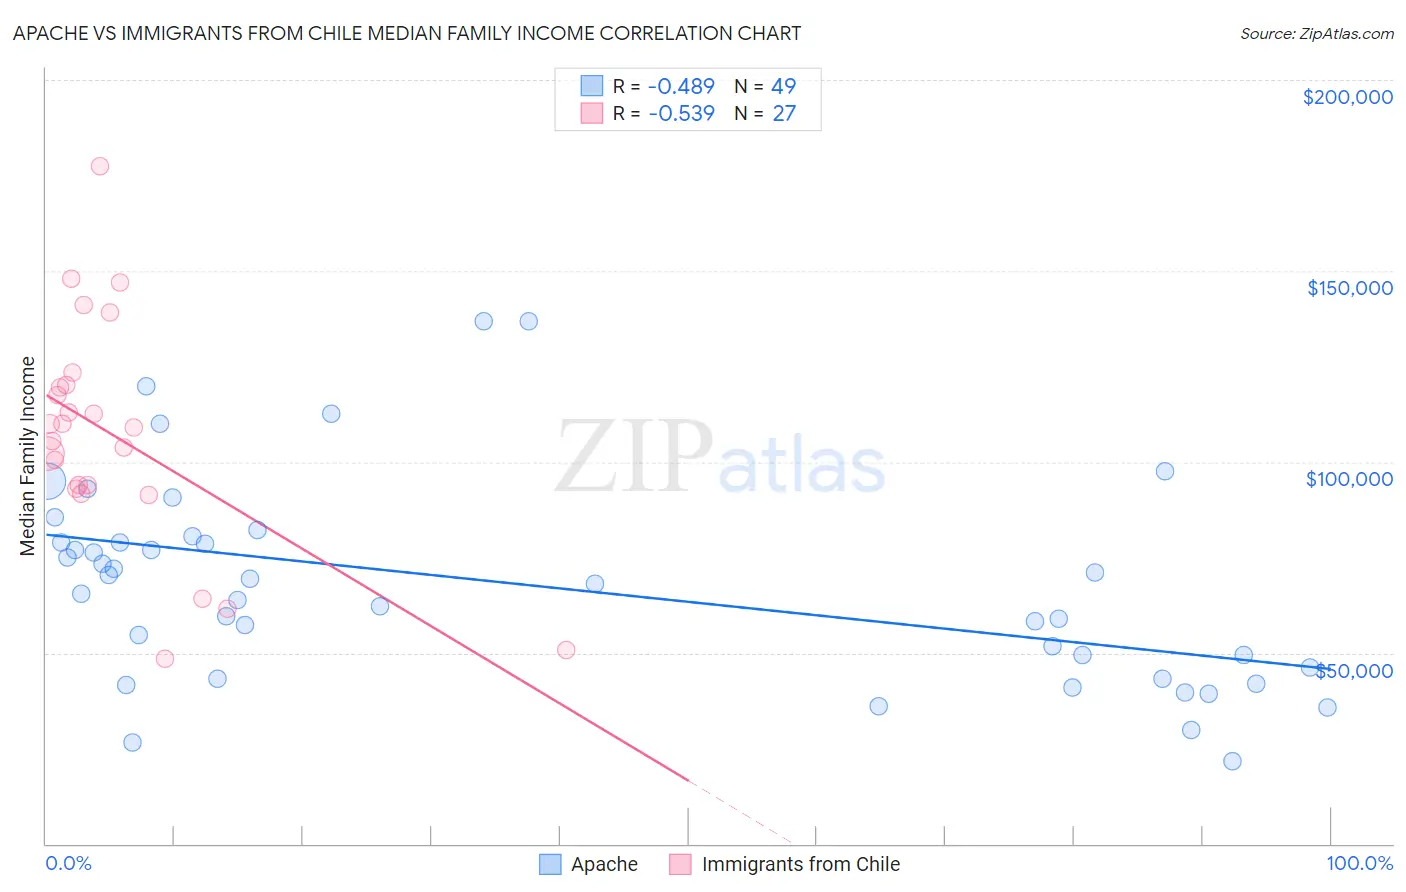 Apache vs Immigrants from Chile Median Family Income